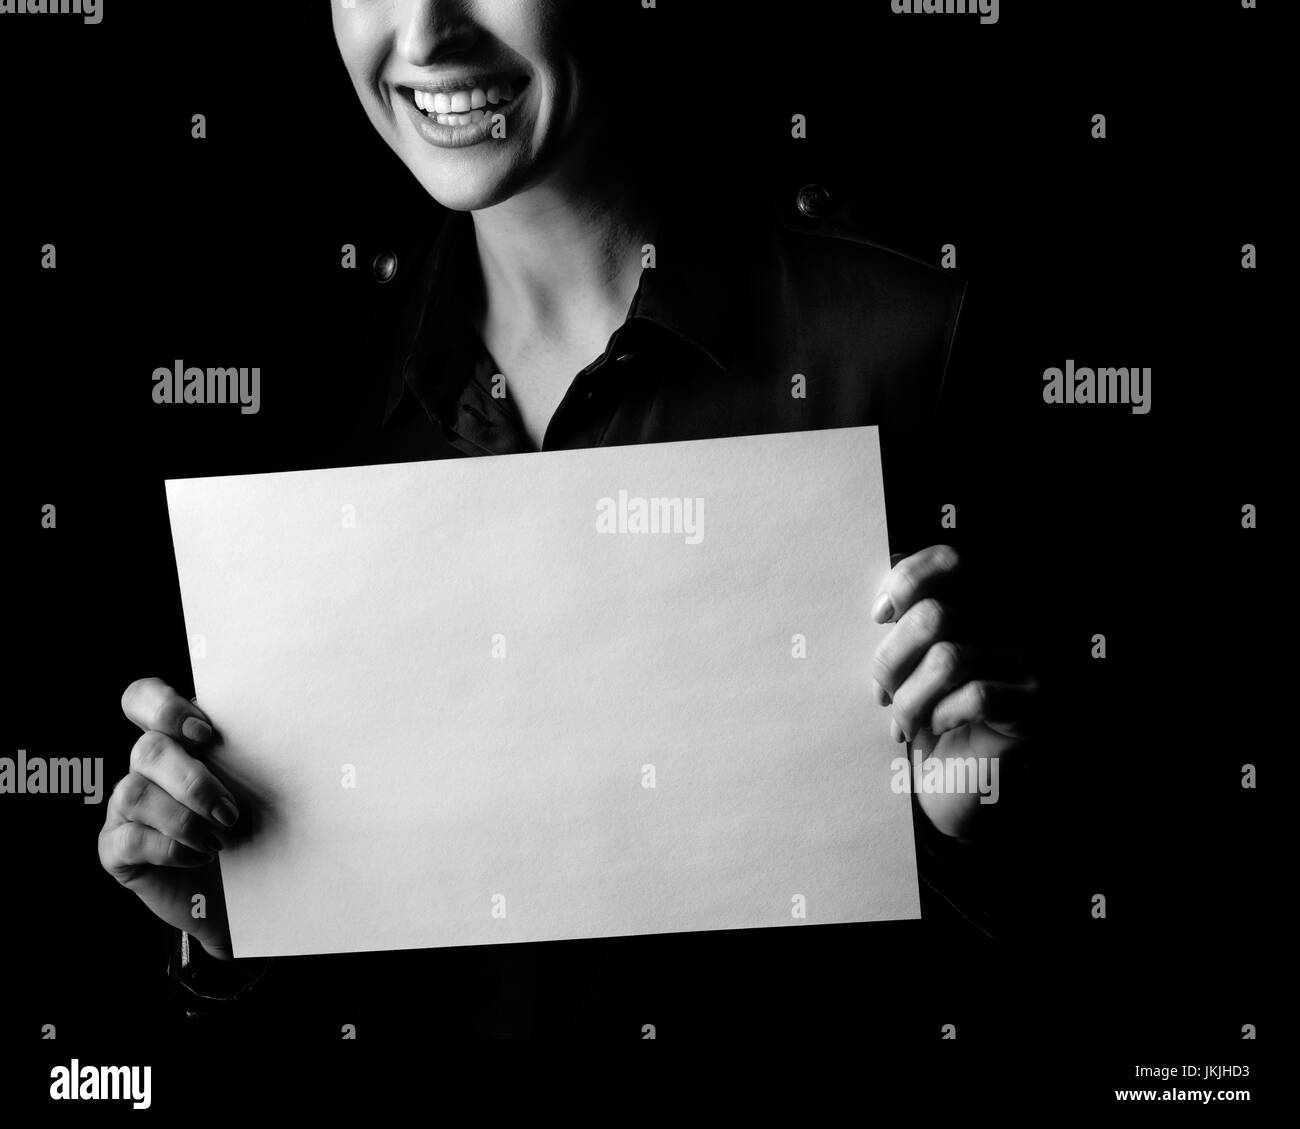 Сoming out into the light. Closeup on smiling woman in the dark dress isolated on black background showing blank paper sheet Stock Photo